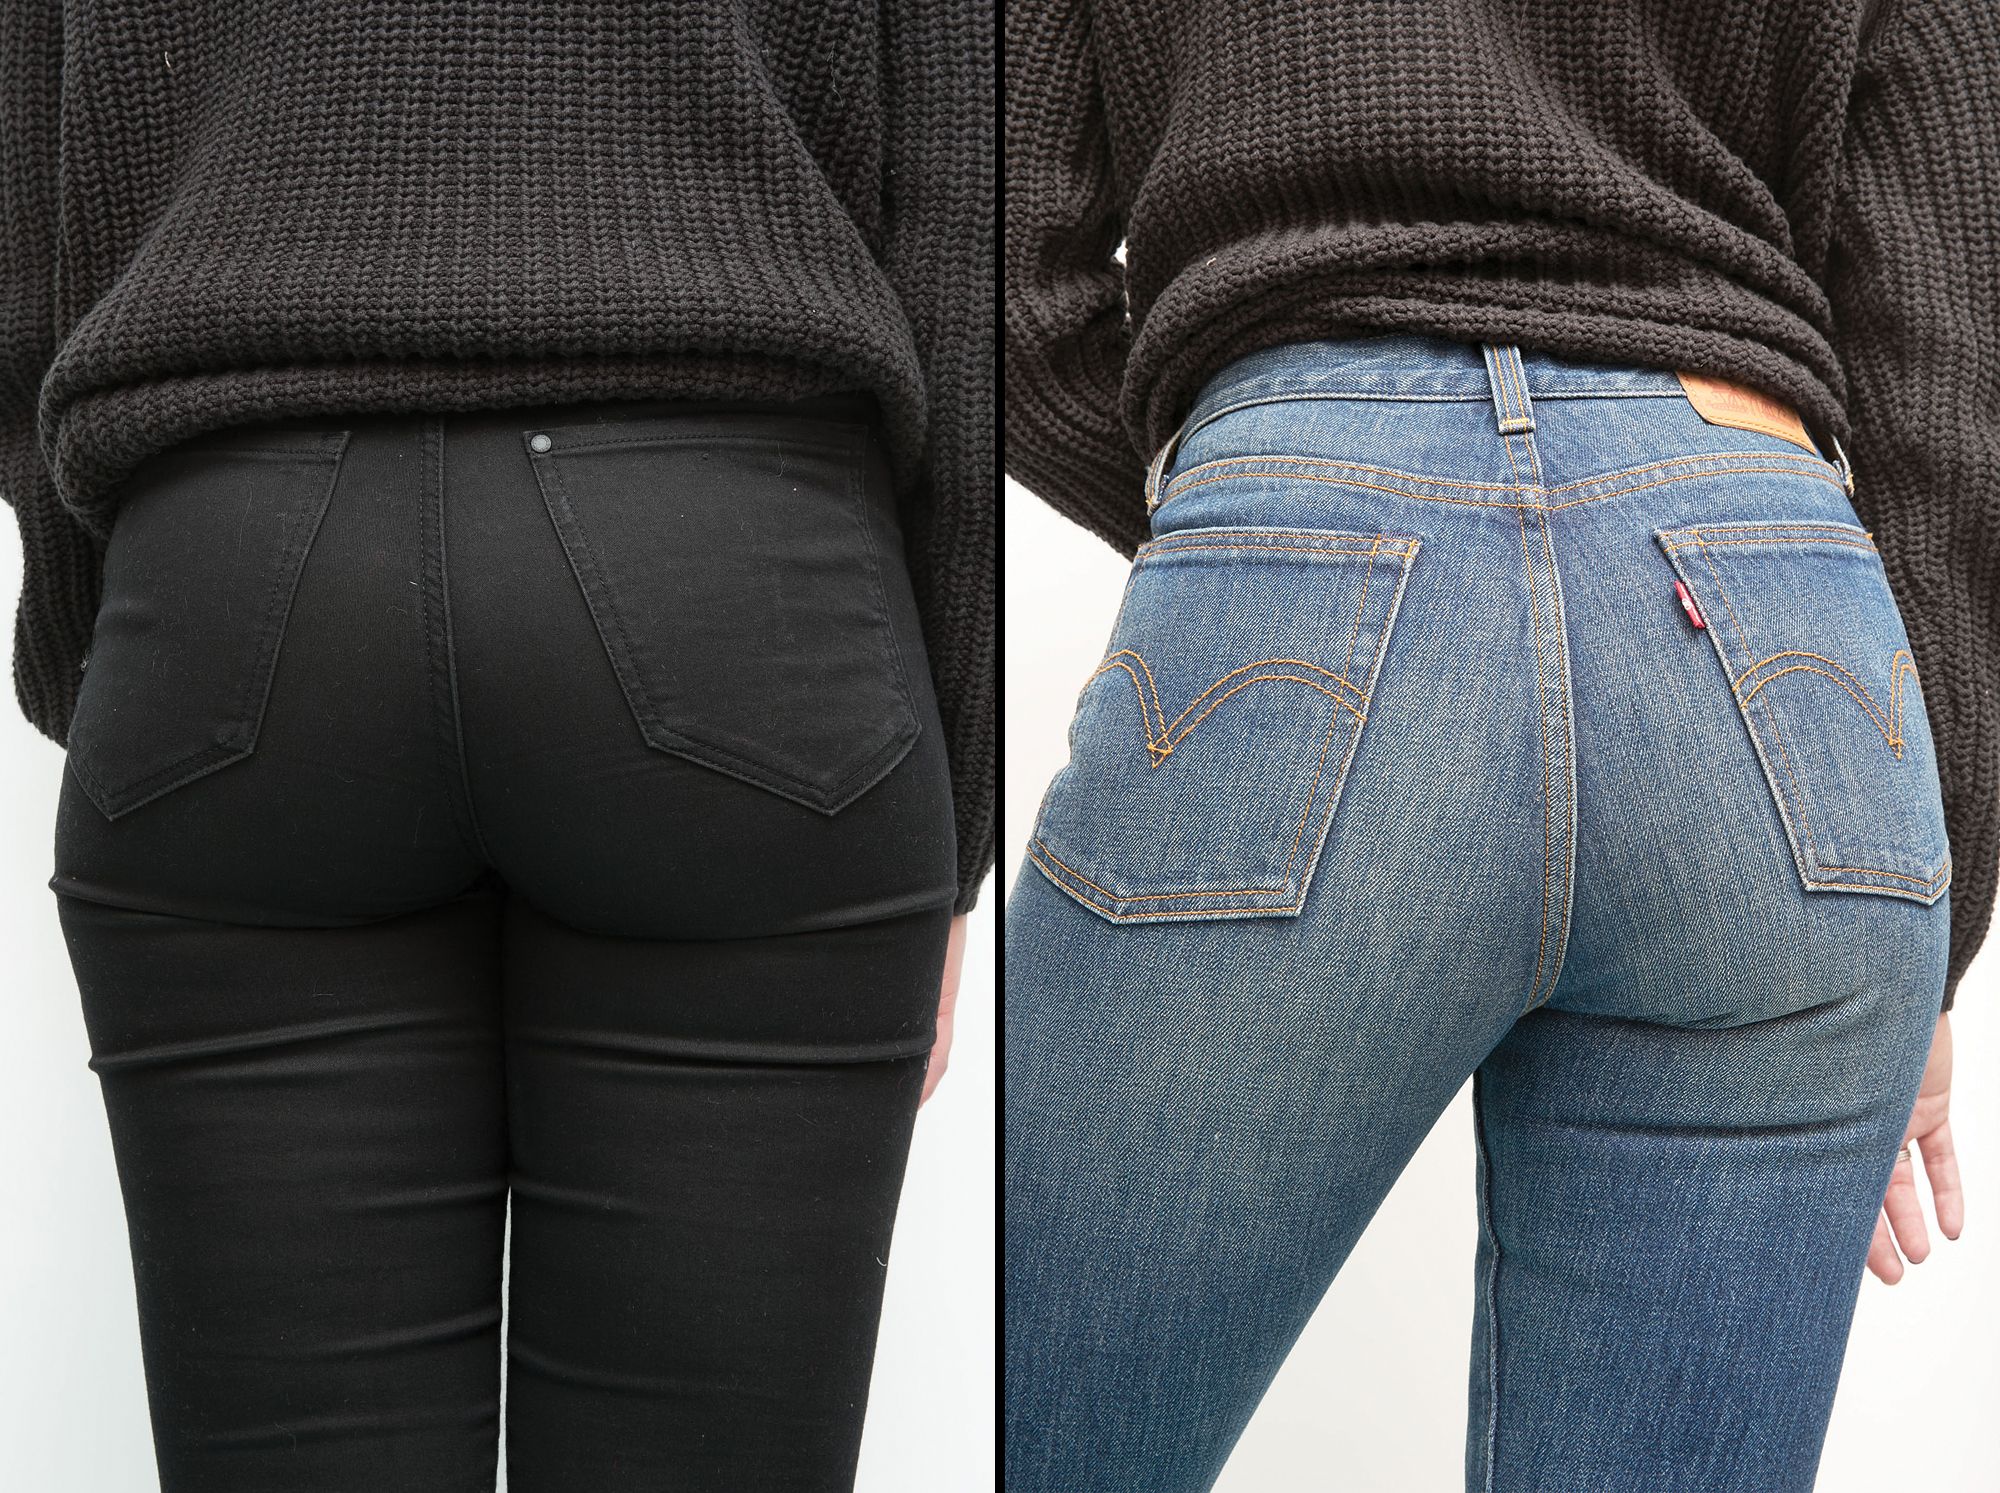 10 People Tried Wedgie Jeans and They